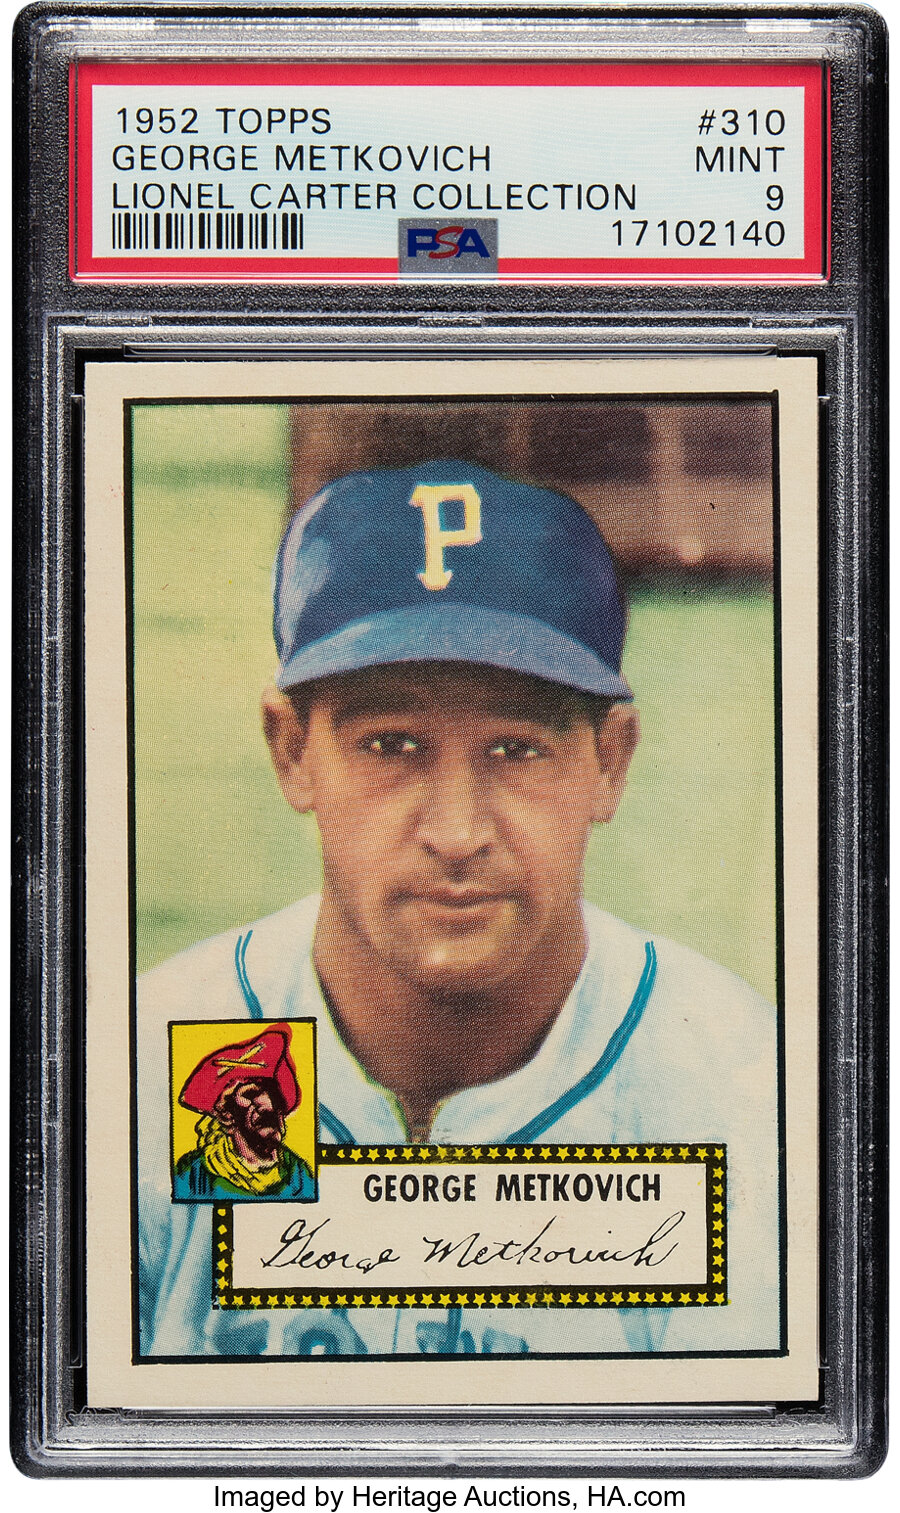 1952 Topps George Metkovich #310 PSA Mint 9 - Pop Four, None Superior! From the Lionel Carter Collection